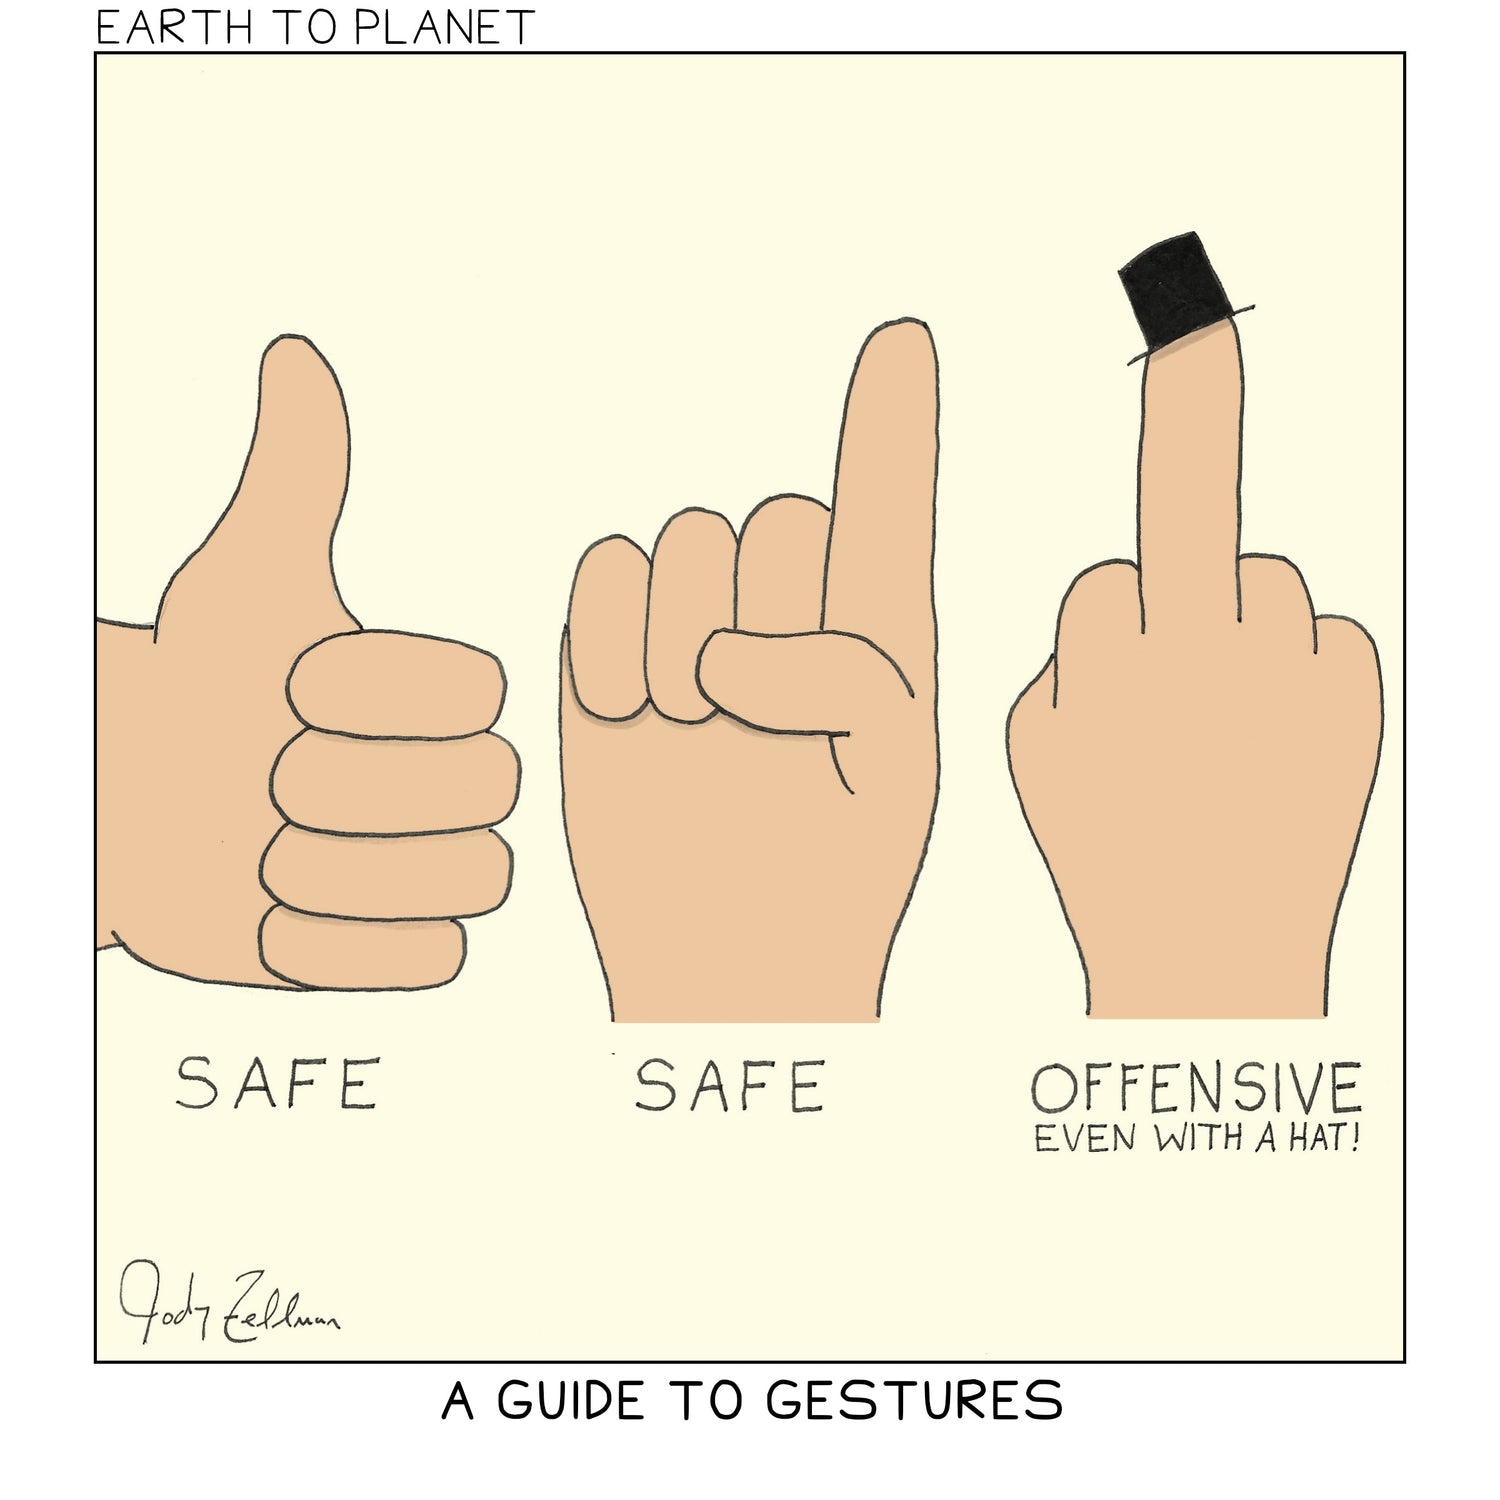 A Guide To Gestures Cartoon